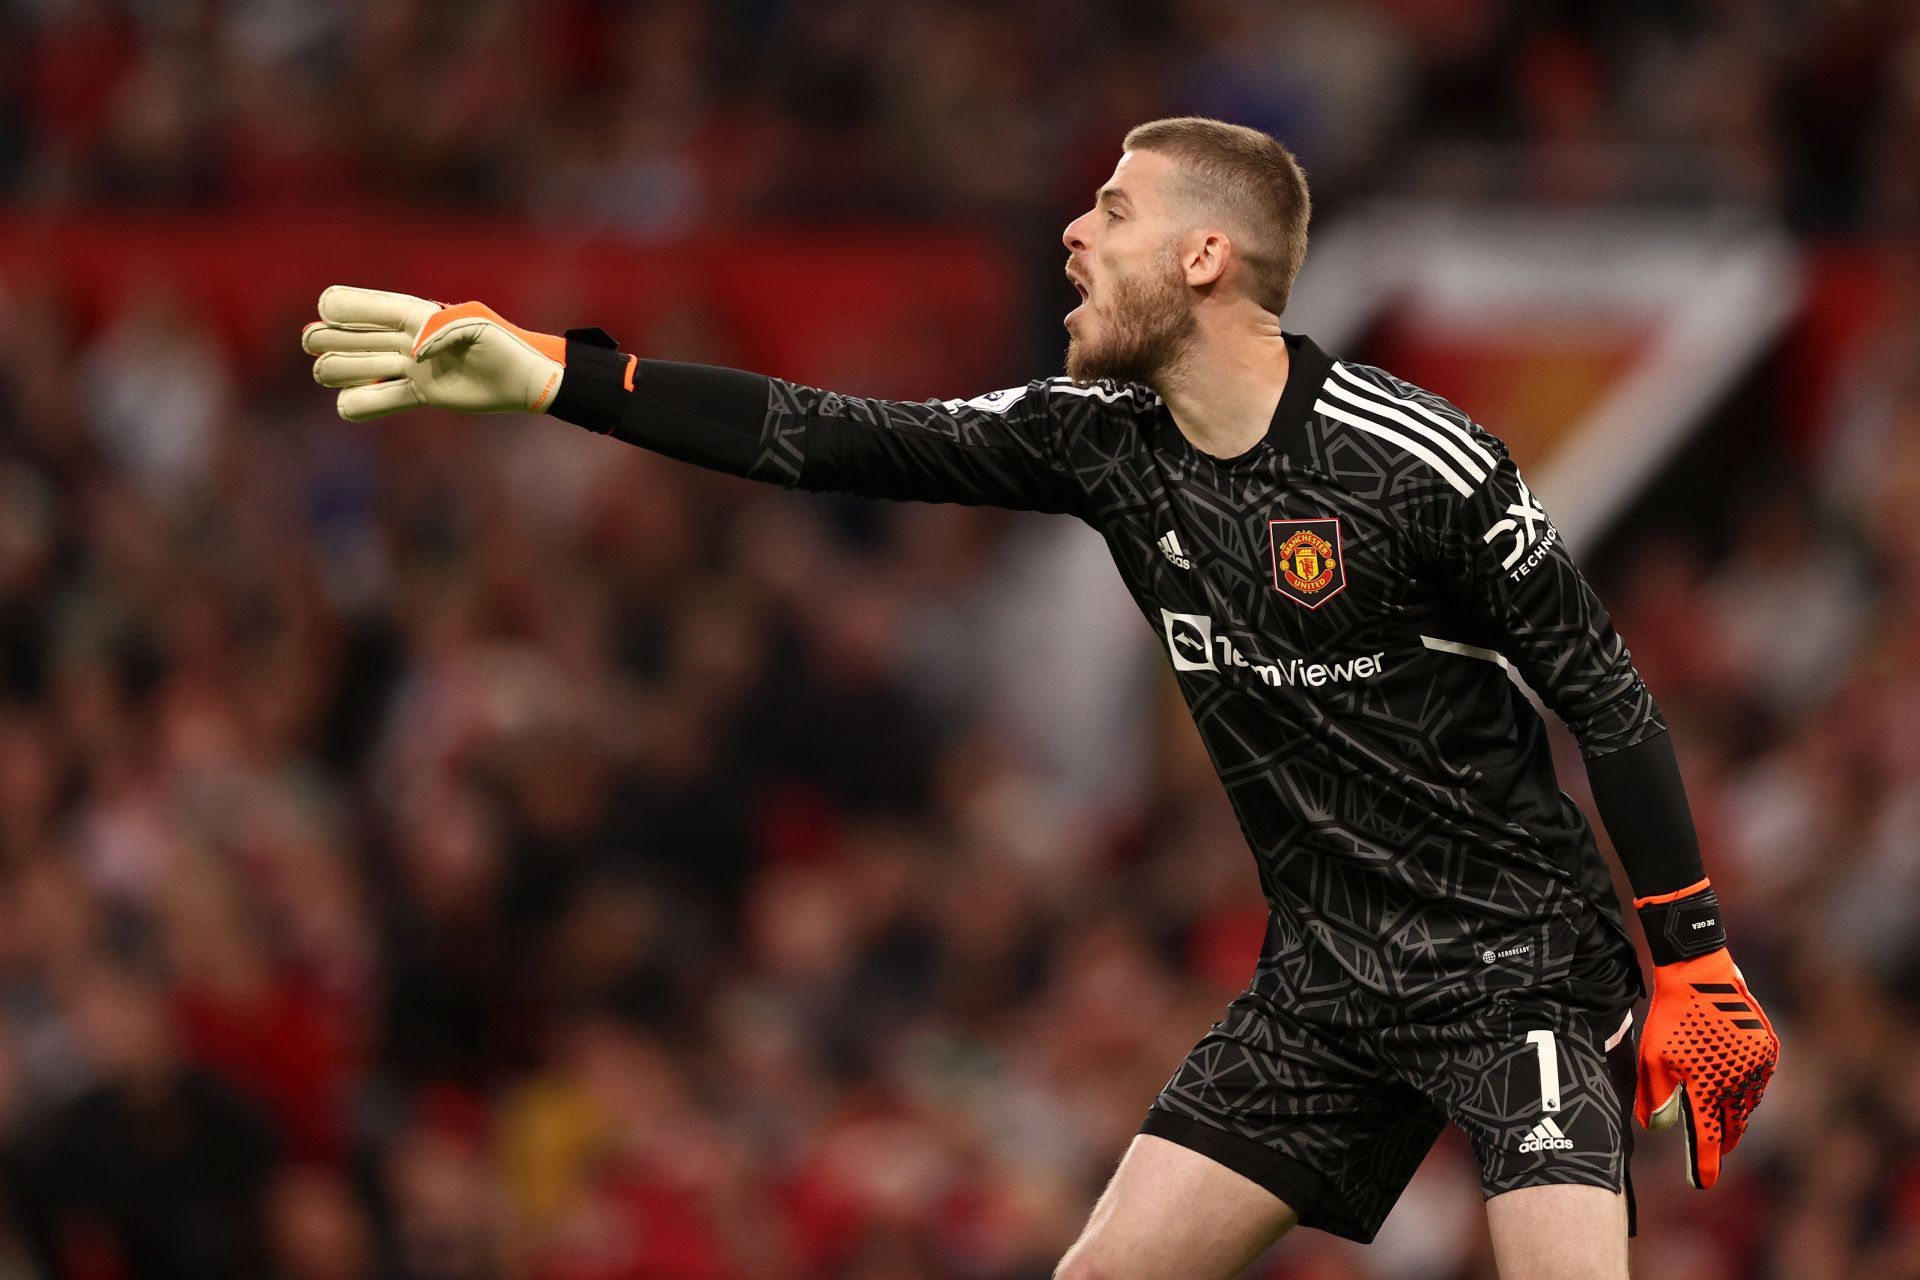 David de Gea could make a stunning return to Old Trafford